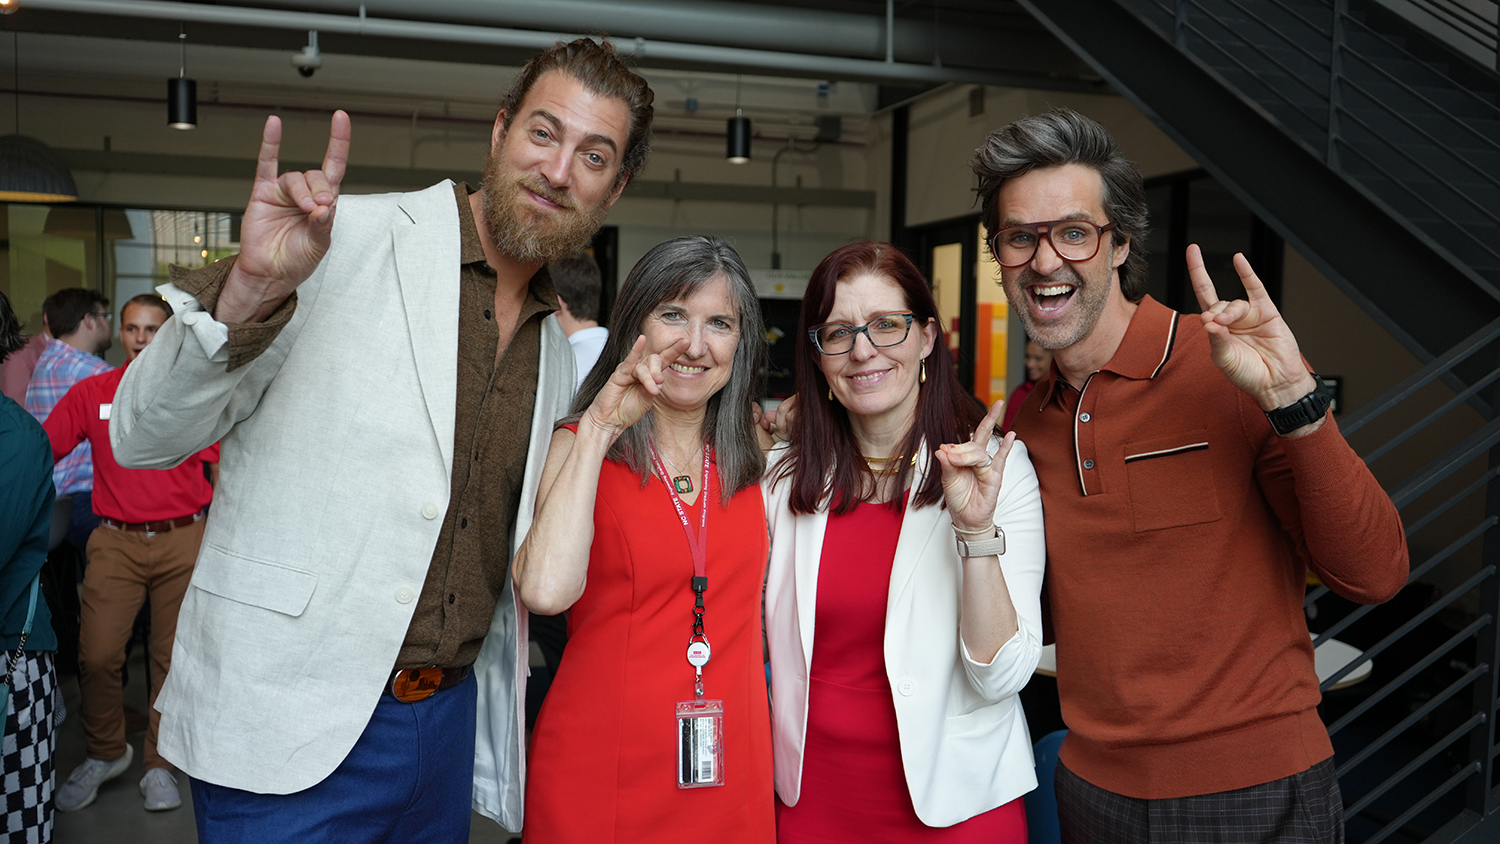 Rhett and Link pose for a photo on either side of department heads Jackie MacDonald Gibson and Julie Swann while all flash the NC State Wolfpack hand sign.